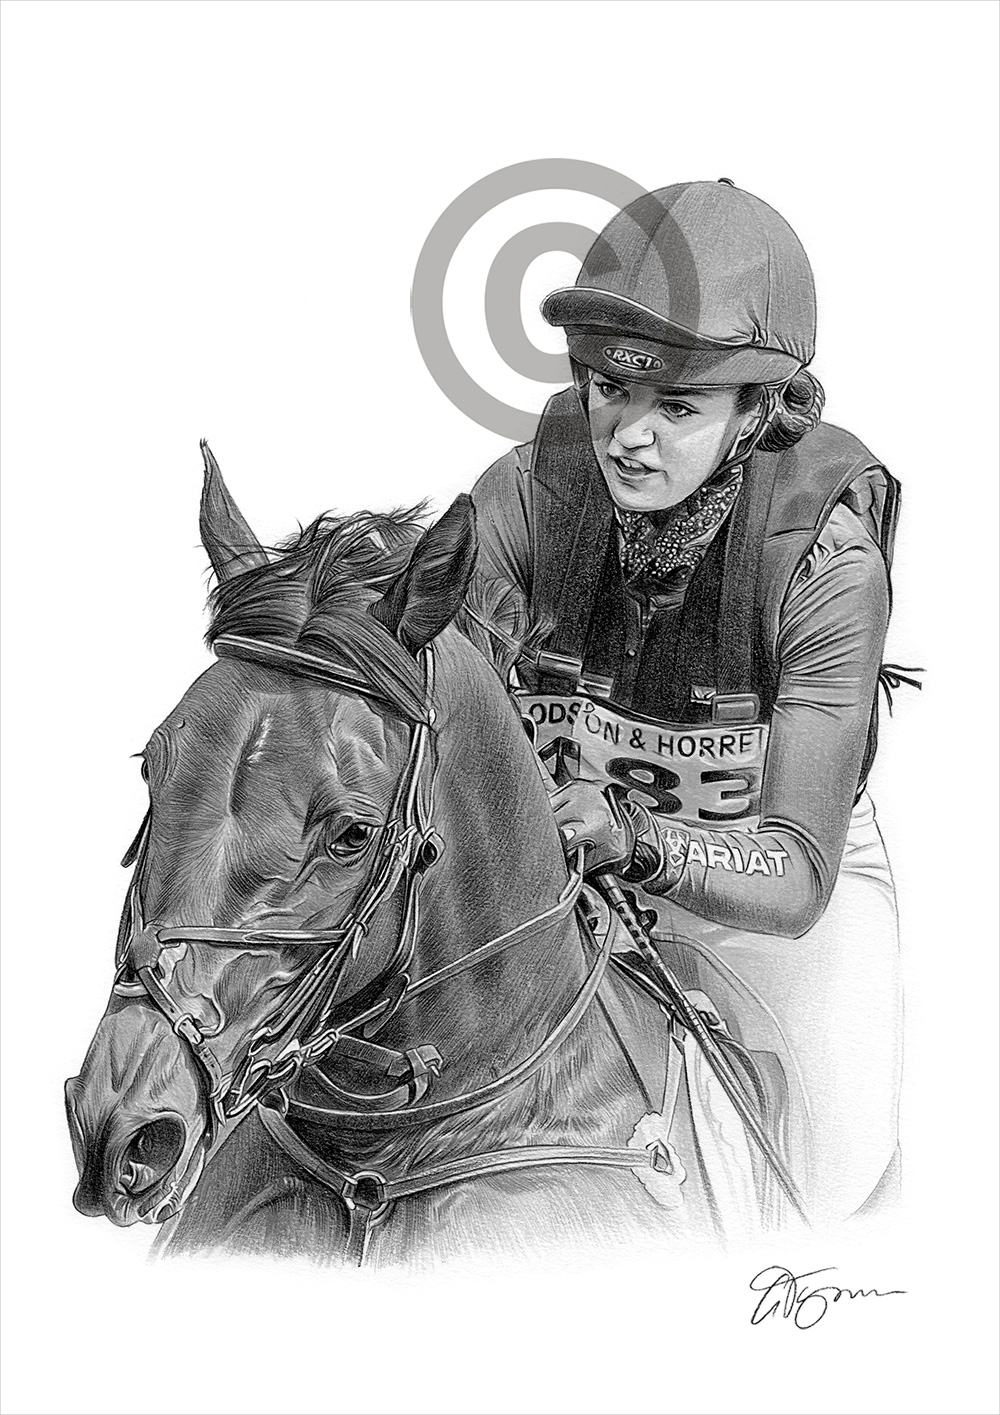 Pencil drawing commission of a racing horse by artist Gary Tymon